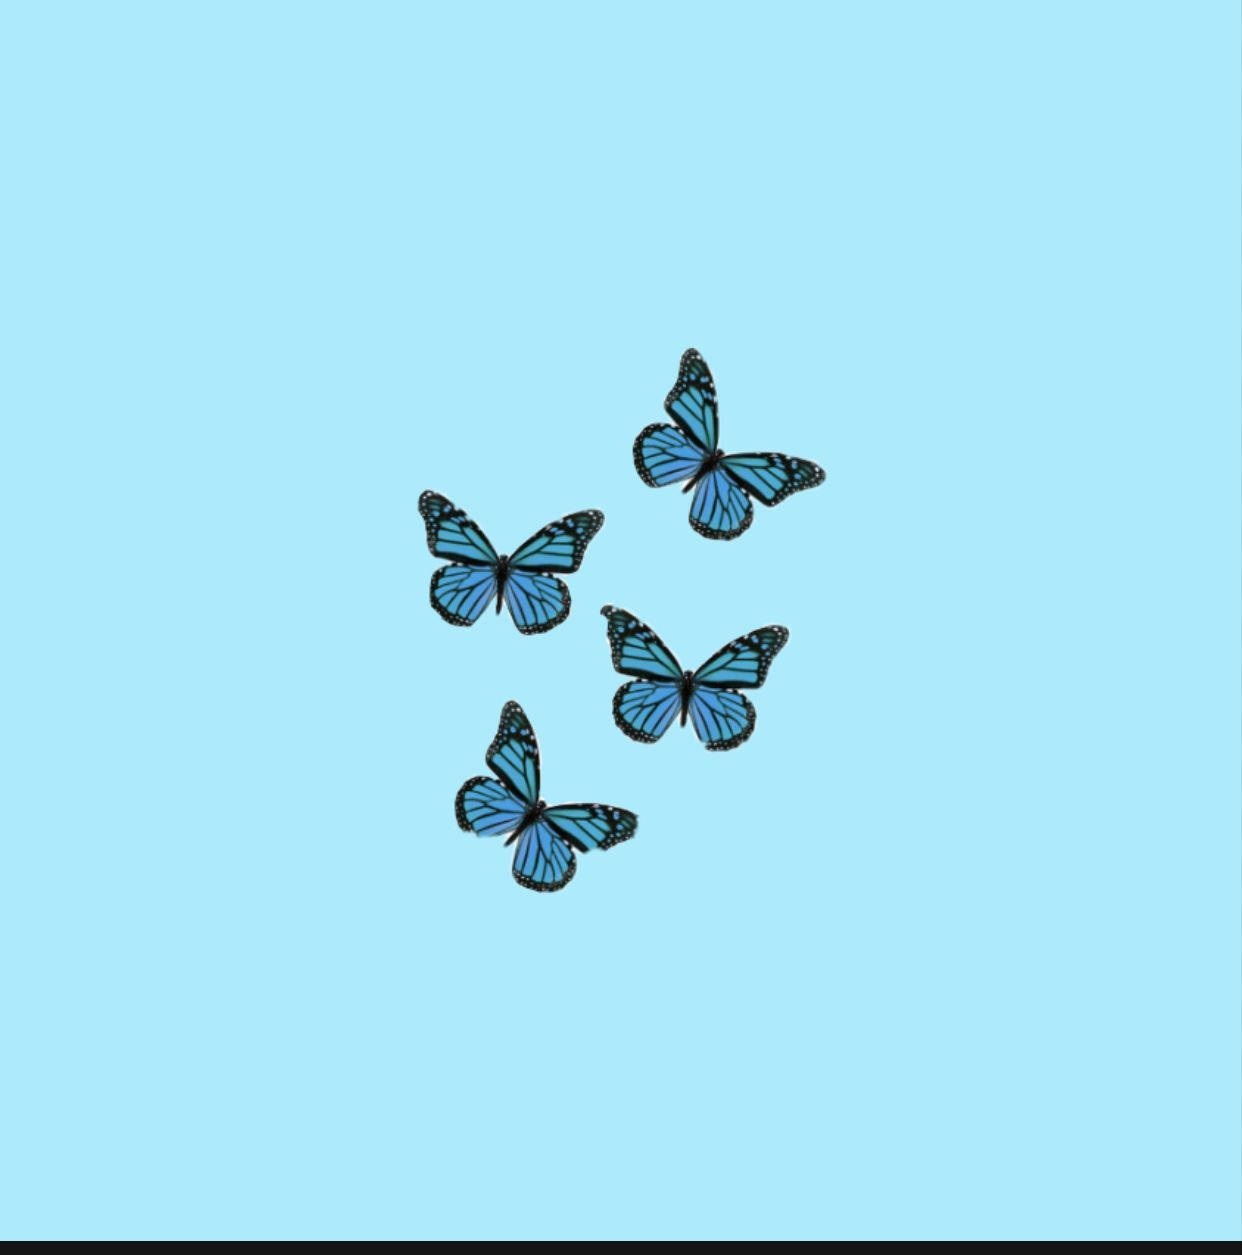 Four Small Blue Pastel Butterfly Wallpaper